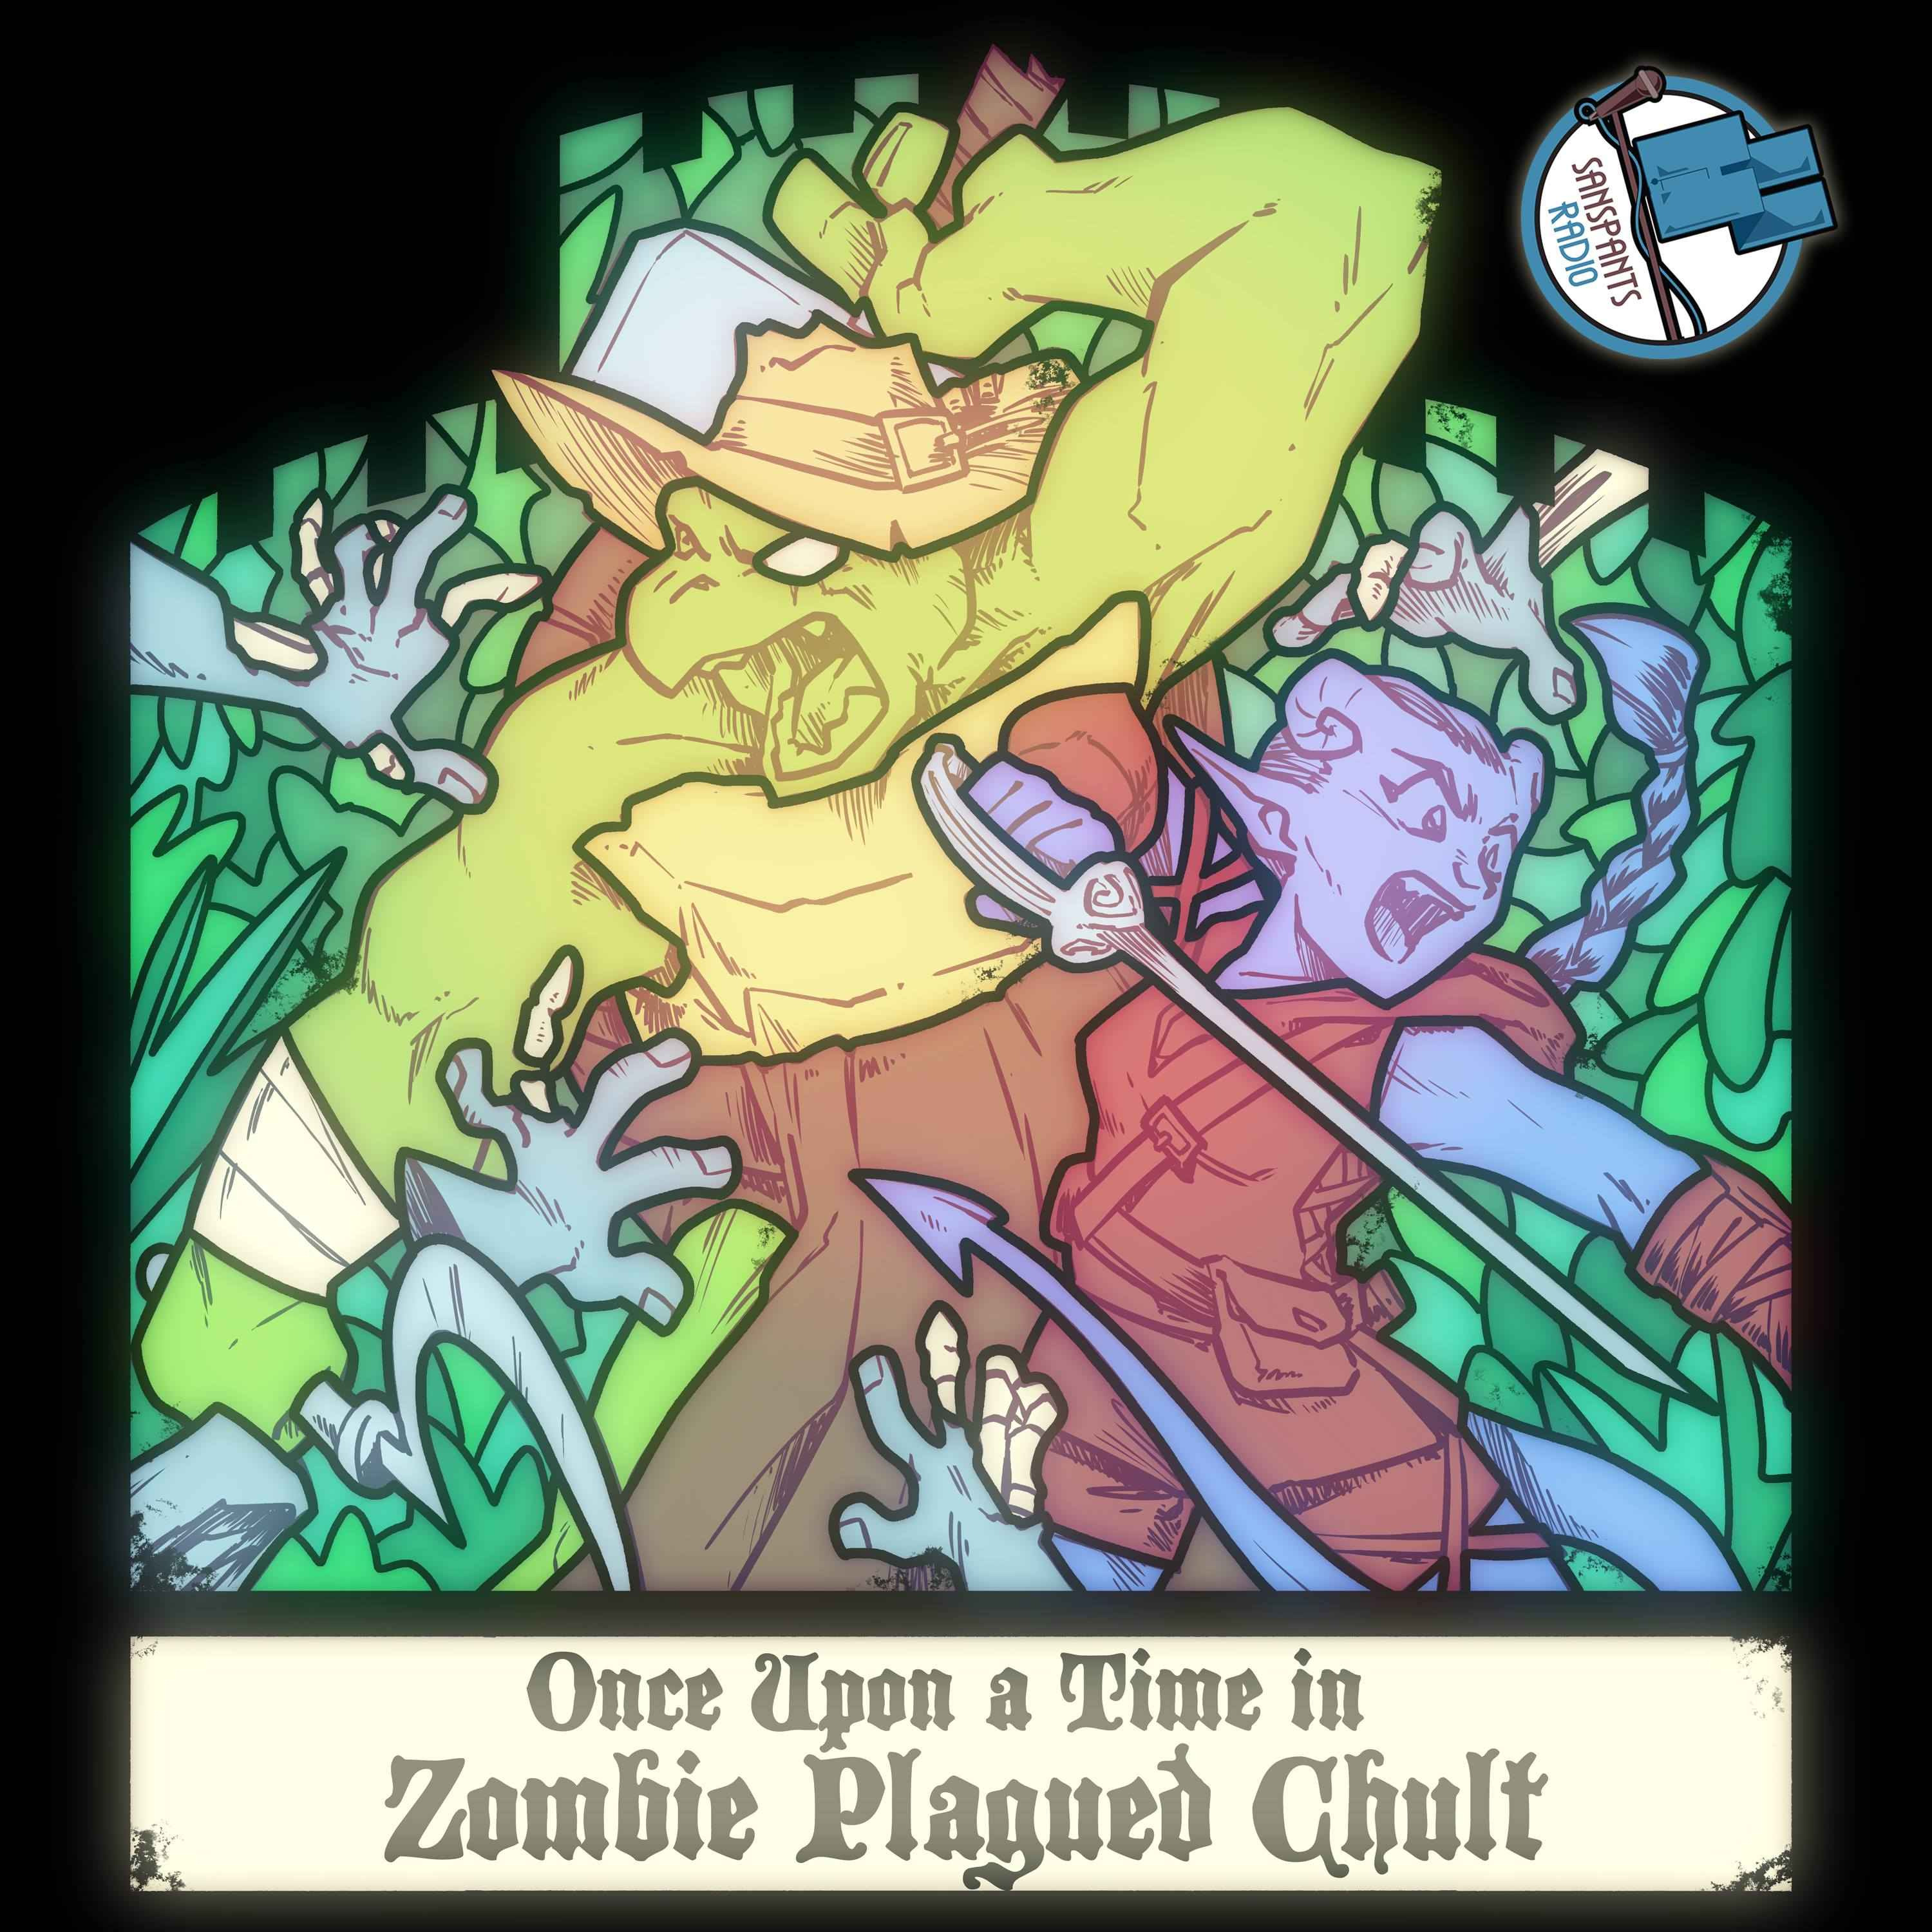 Zombie Plagued Chult I #16 [Blank] in the Dungeon